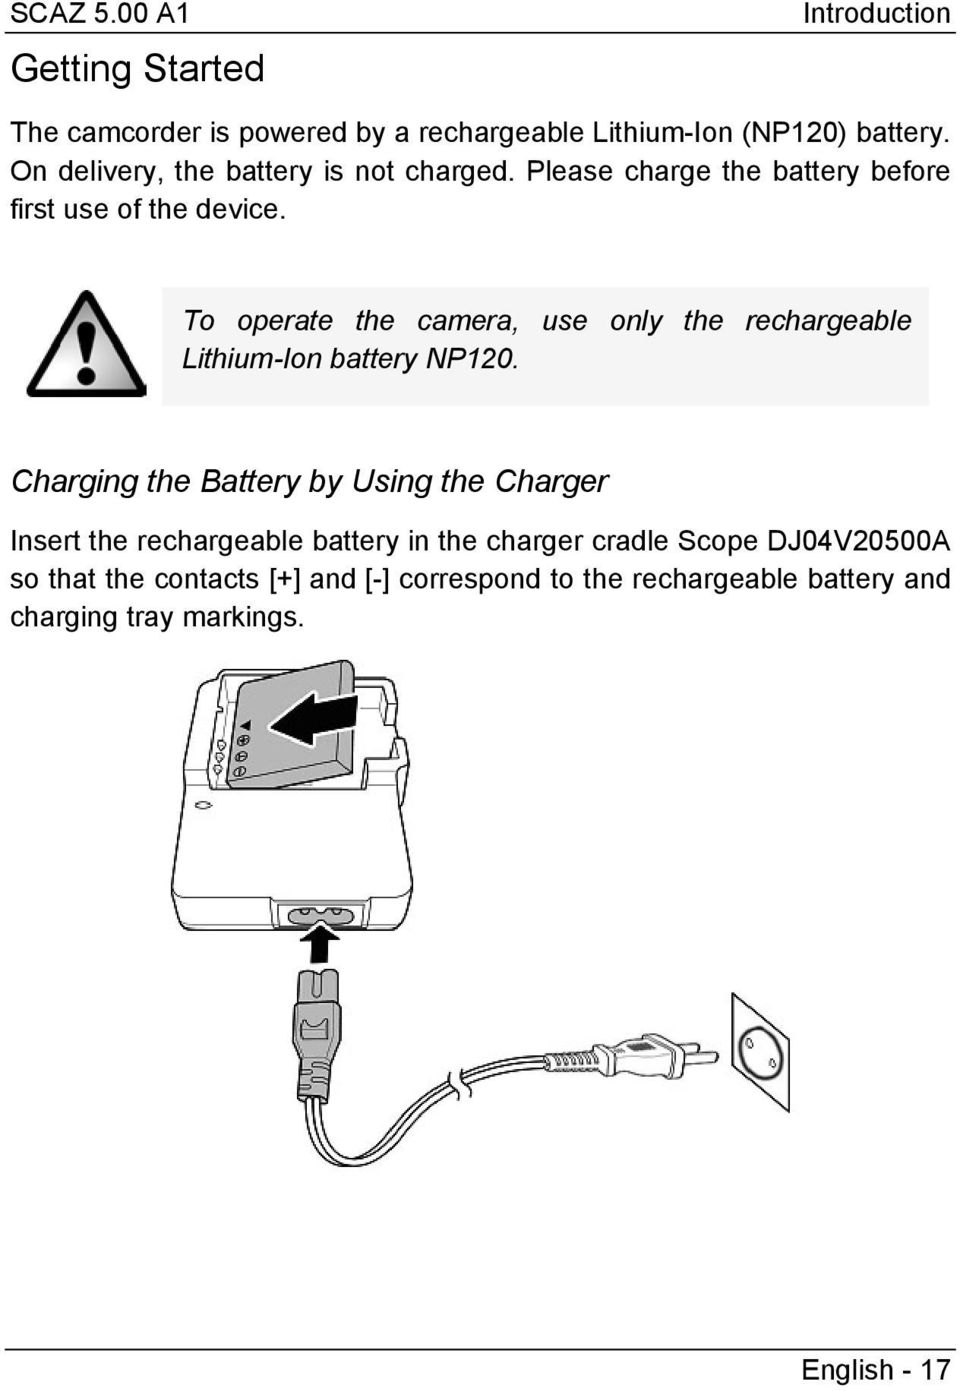 To operate the camera, use only the rechargeable Lithium-Ion battery NP120.